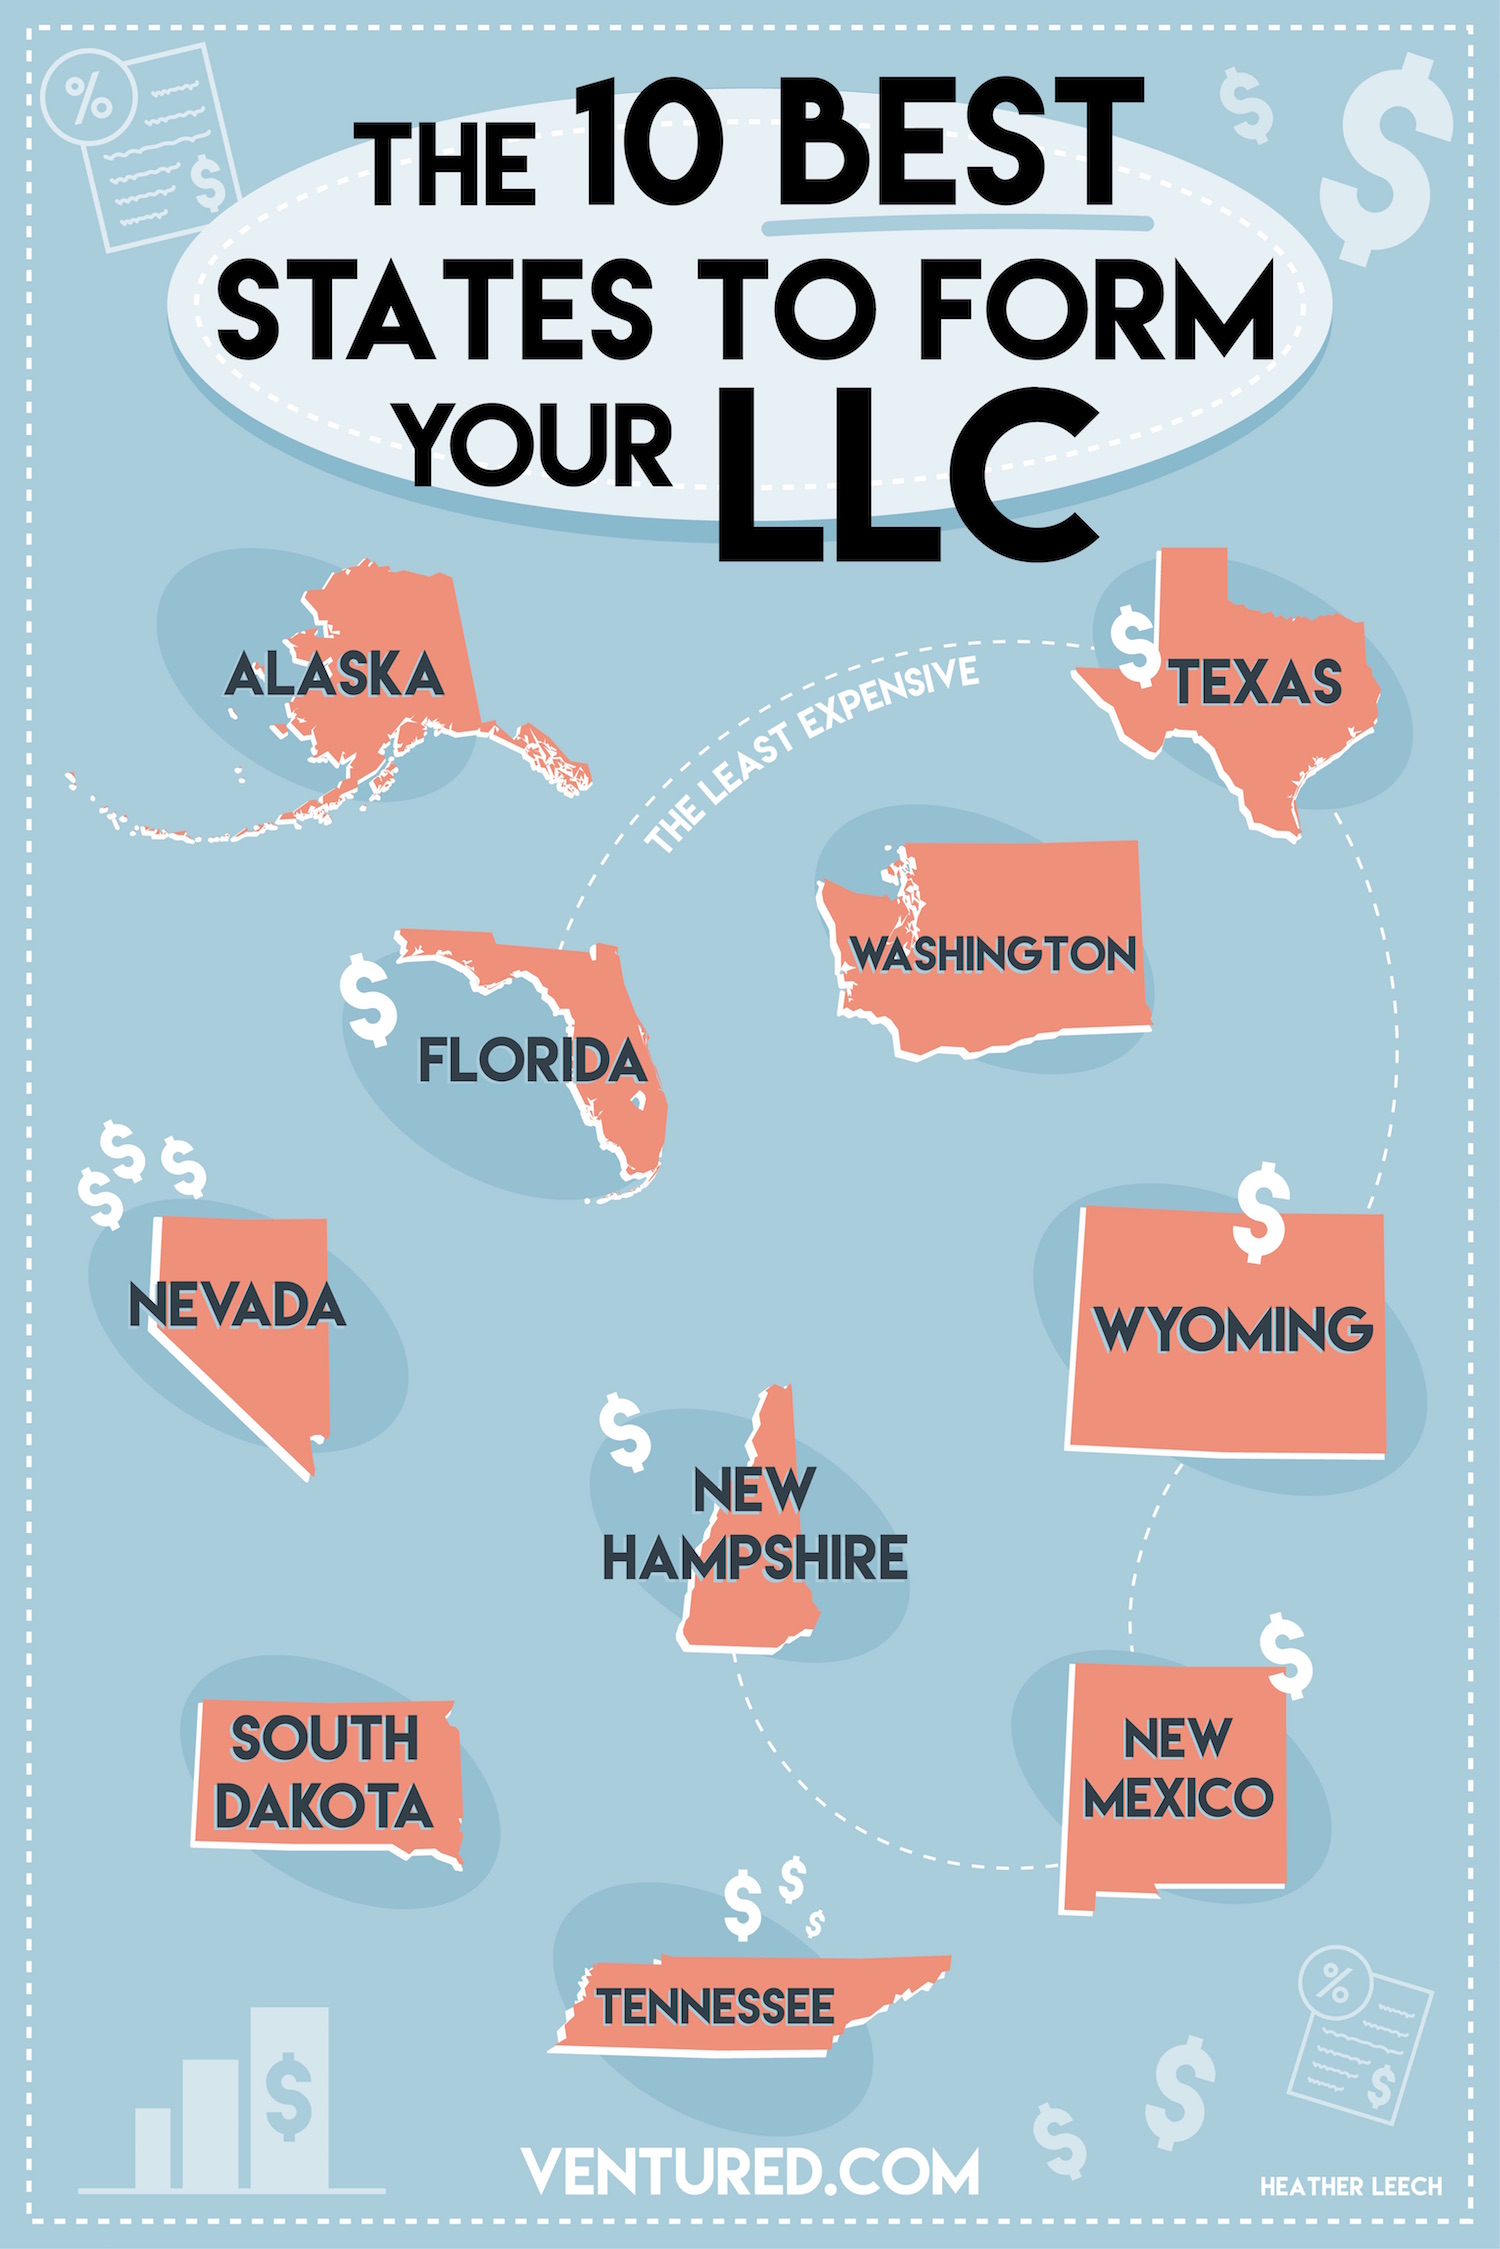 best states to form an LLC infographic